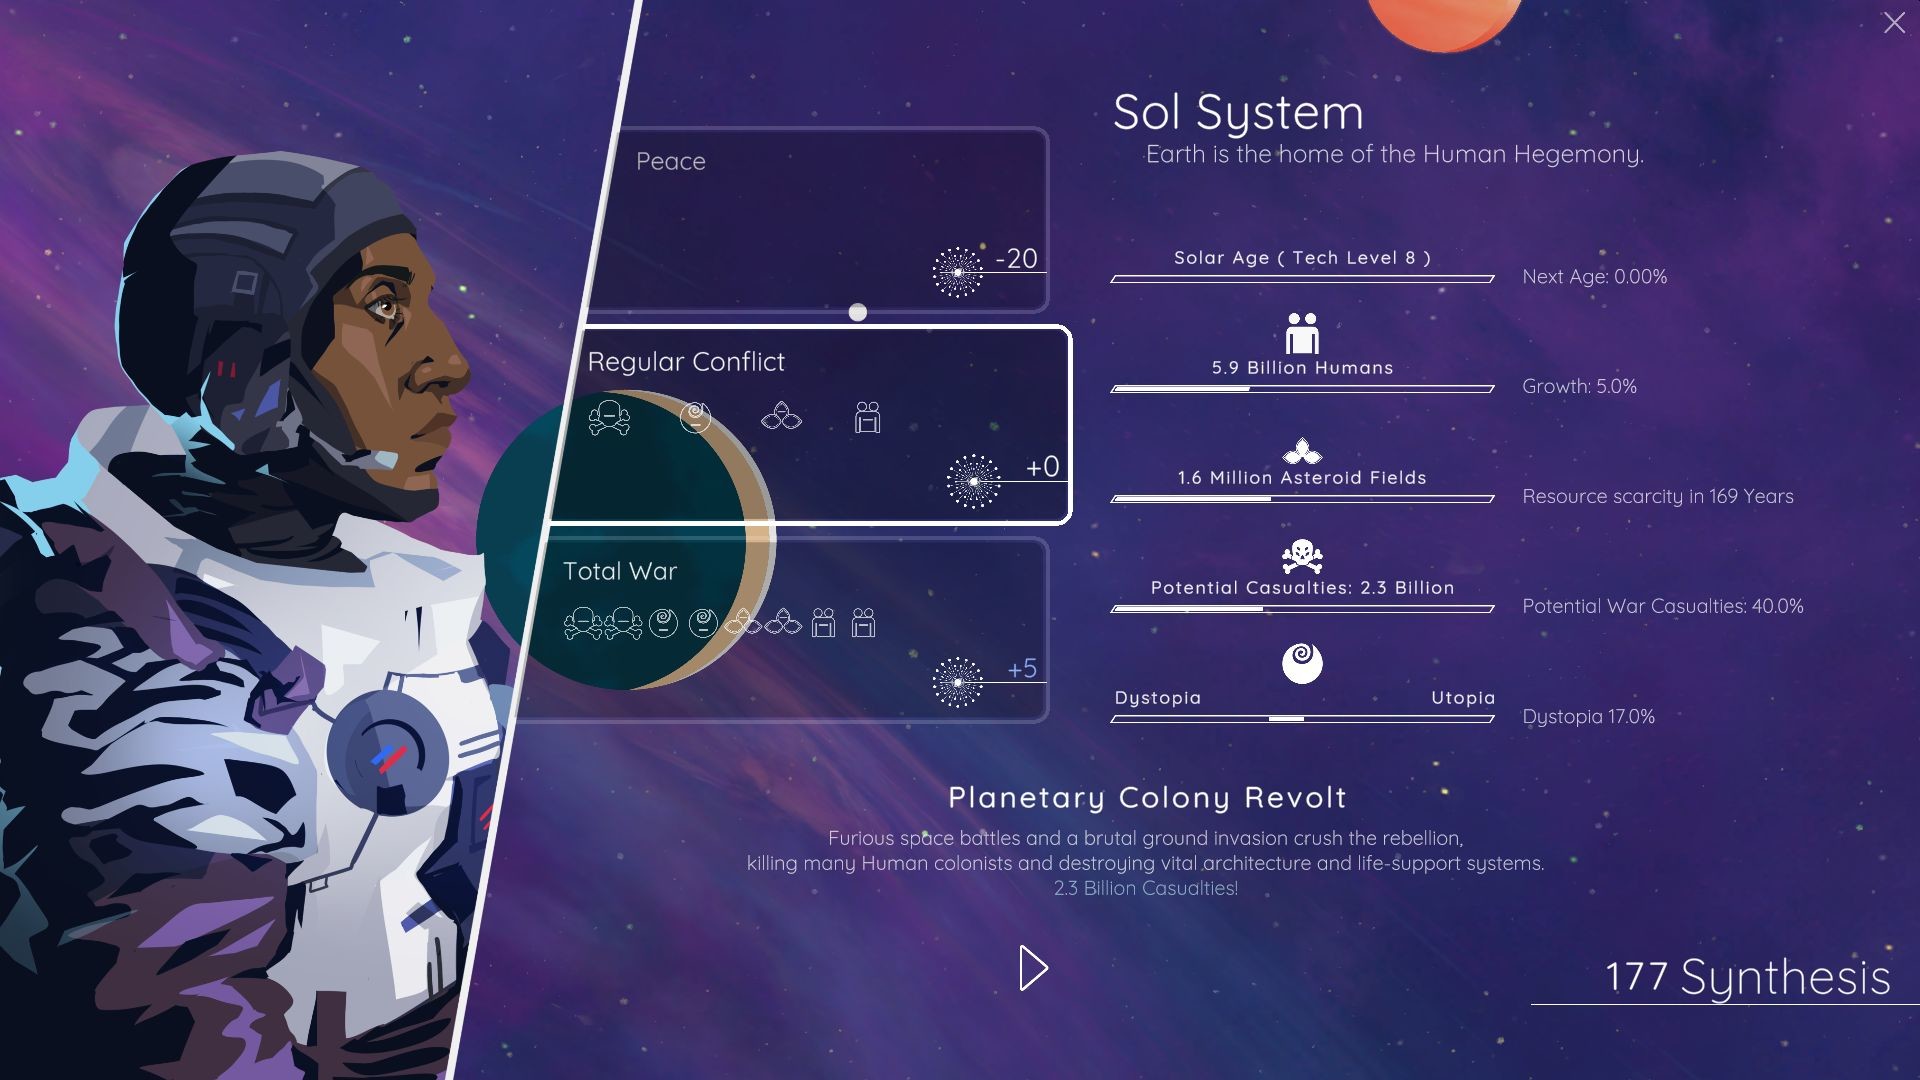 Screenshot from The Fermi Paradox. An illustrated portrait of a Black human being wearing astronaut gear is faced in profile to the right against an abstracted, space background. The right side of the screen features various interface elements and controllers for the "Sol System".